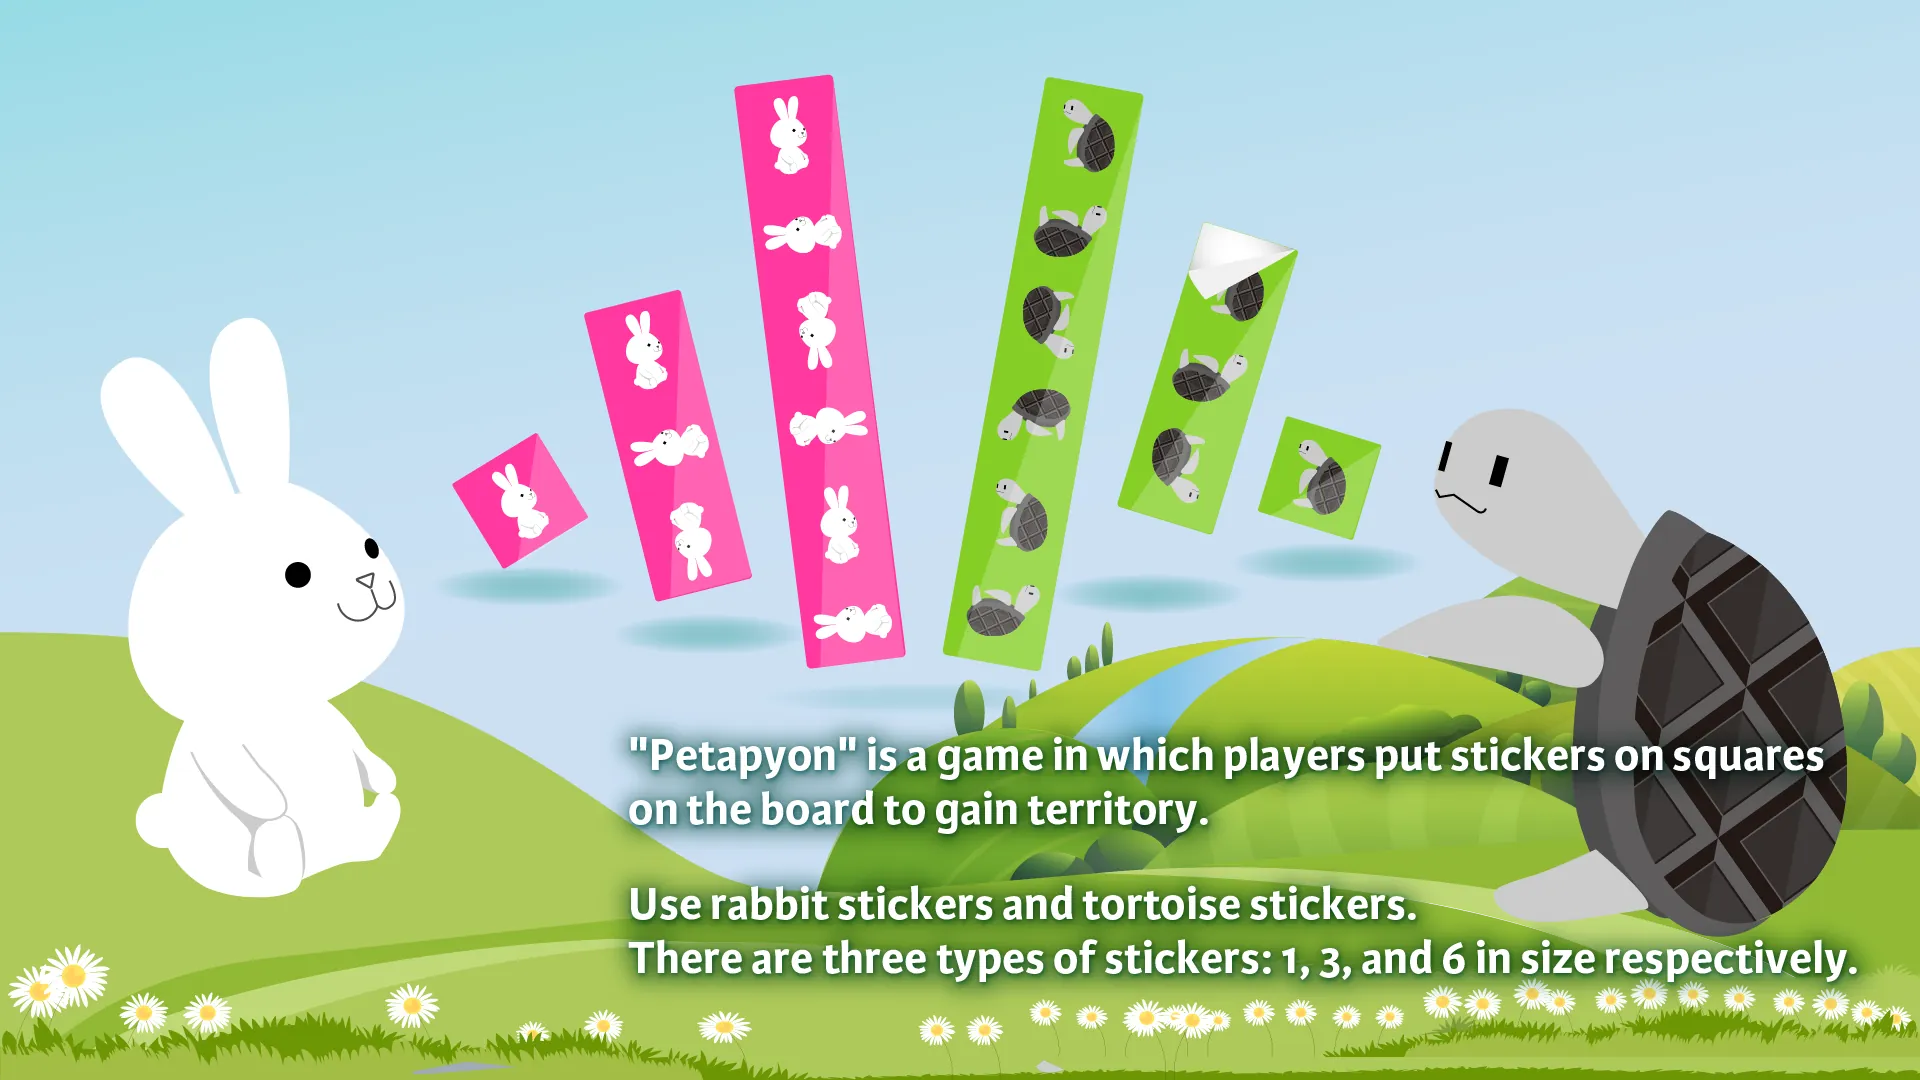 'Petapyon' is a game in which players put stickers on squares on the board to gain territory.Use rabbit stickers and tortoise stickers.There are three types of stickers: 1, 3, and 6 in size respectively.